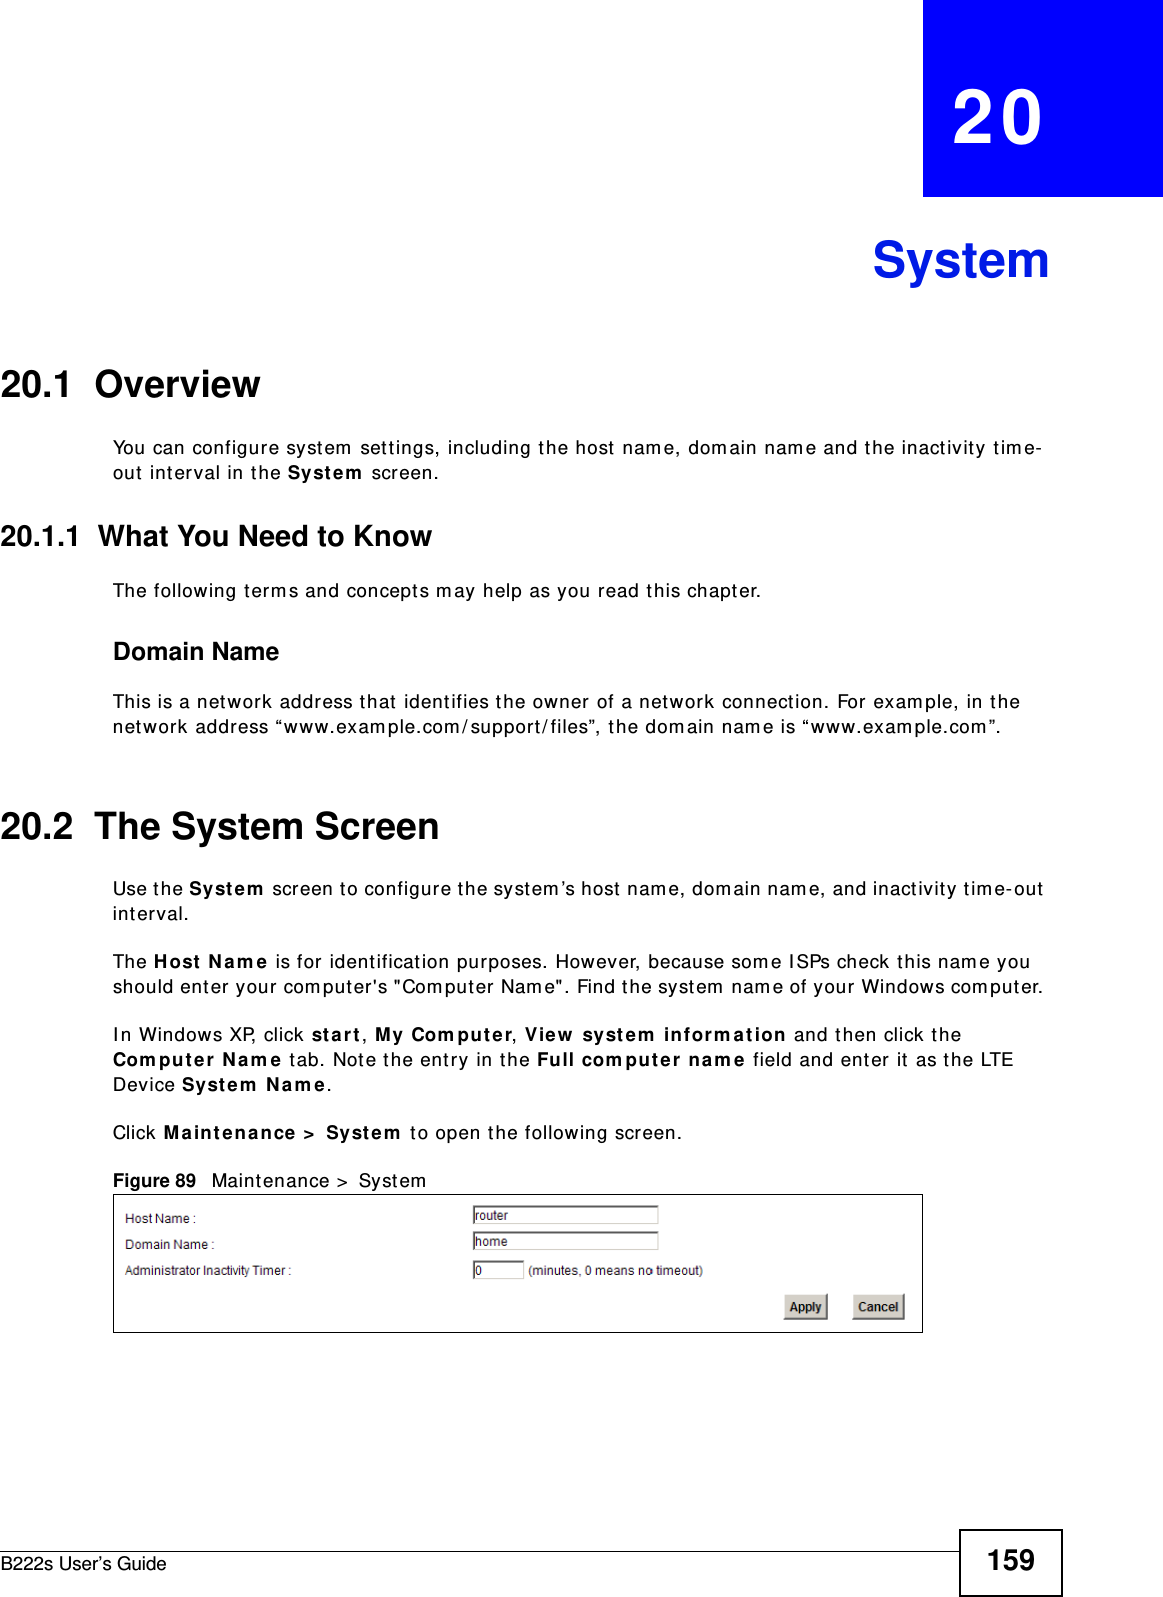 B222s User’s Guide 159CHAPTER   20System20.1  Overview You can configure syst em  set t ings, including t he host nam e, dom ain nam e and the inactivity t im e-out  int erval in t he Syst e m  screen.    20.1.1  What You Need to KnowThe following term s and concept s m ay help as you read this chapt er.Domain NameThis is a network address that  ident ifies t he owner of a network connect ion. For exam ple, in the network address “ www.exam ple.com / support / files”, t he dom ain nam e is “ www.exam ple.com ”. 20.2  The System ScreenUse t he Sy st em  screen t o configure t he system ’s host  nam e, dom ain nam e, and inactivity t im e- out  int erval.The H ost  N am e  is for ident ification purposes. However, because som e I SPs check t his nam e you should ent er your com put er&apos;s &quot;Com puter Nam e&quot;. Find t he syst em  nam e of your Windows com put er. I n Windows XP, click st a r t , My Com put e r, View  syst em  inform a t ion and t hen click t he Com put e r  N a m e t ab. Note t he ent ry in t he Full com put er  na m e field and ent er it  as the LTE Device Syst em  Na m e .Click M a int e n a n ce &gt;  Syst e m  t o open t he following screen. Figure 89   Maint enance &gt;  System  